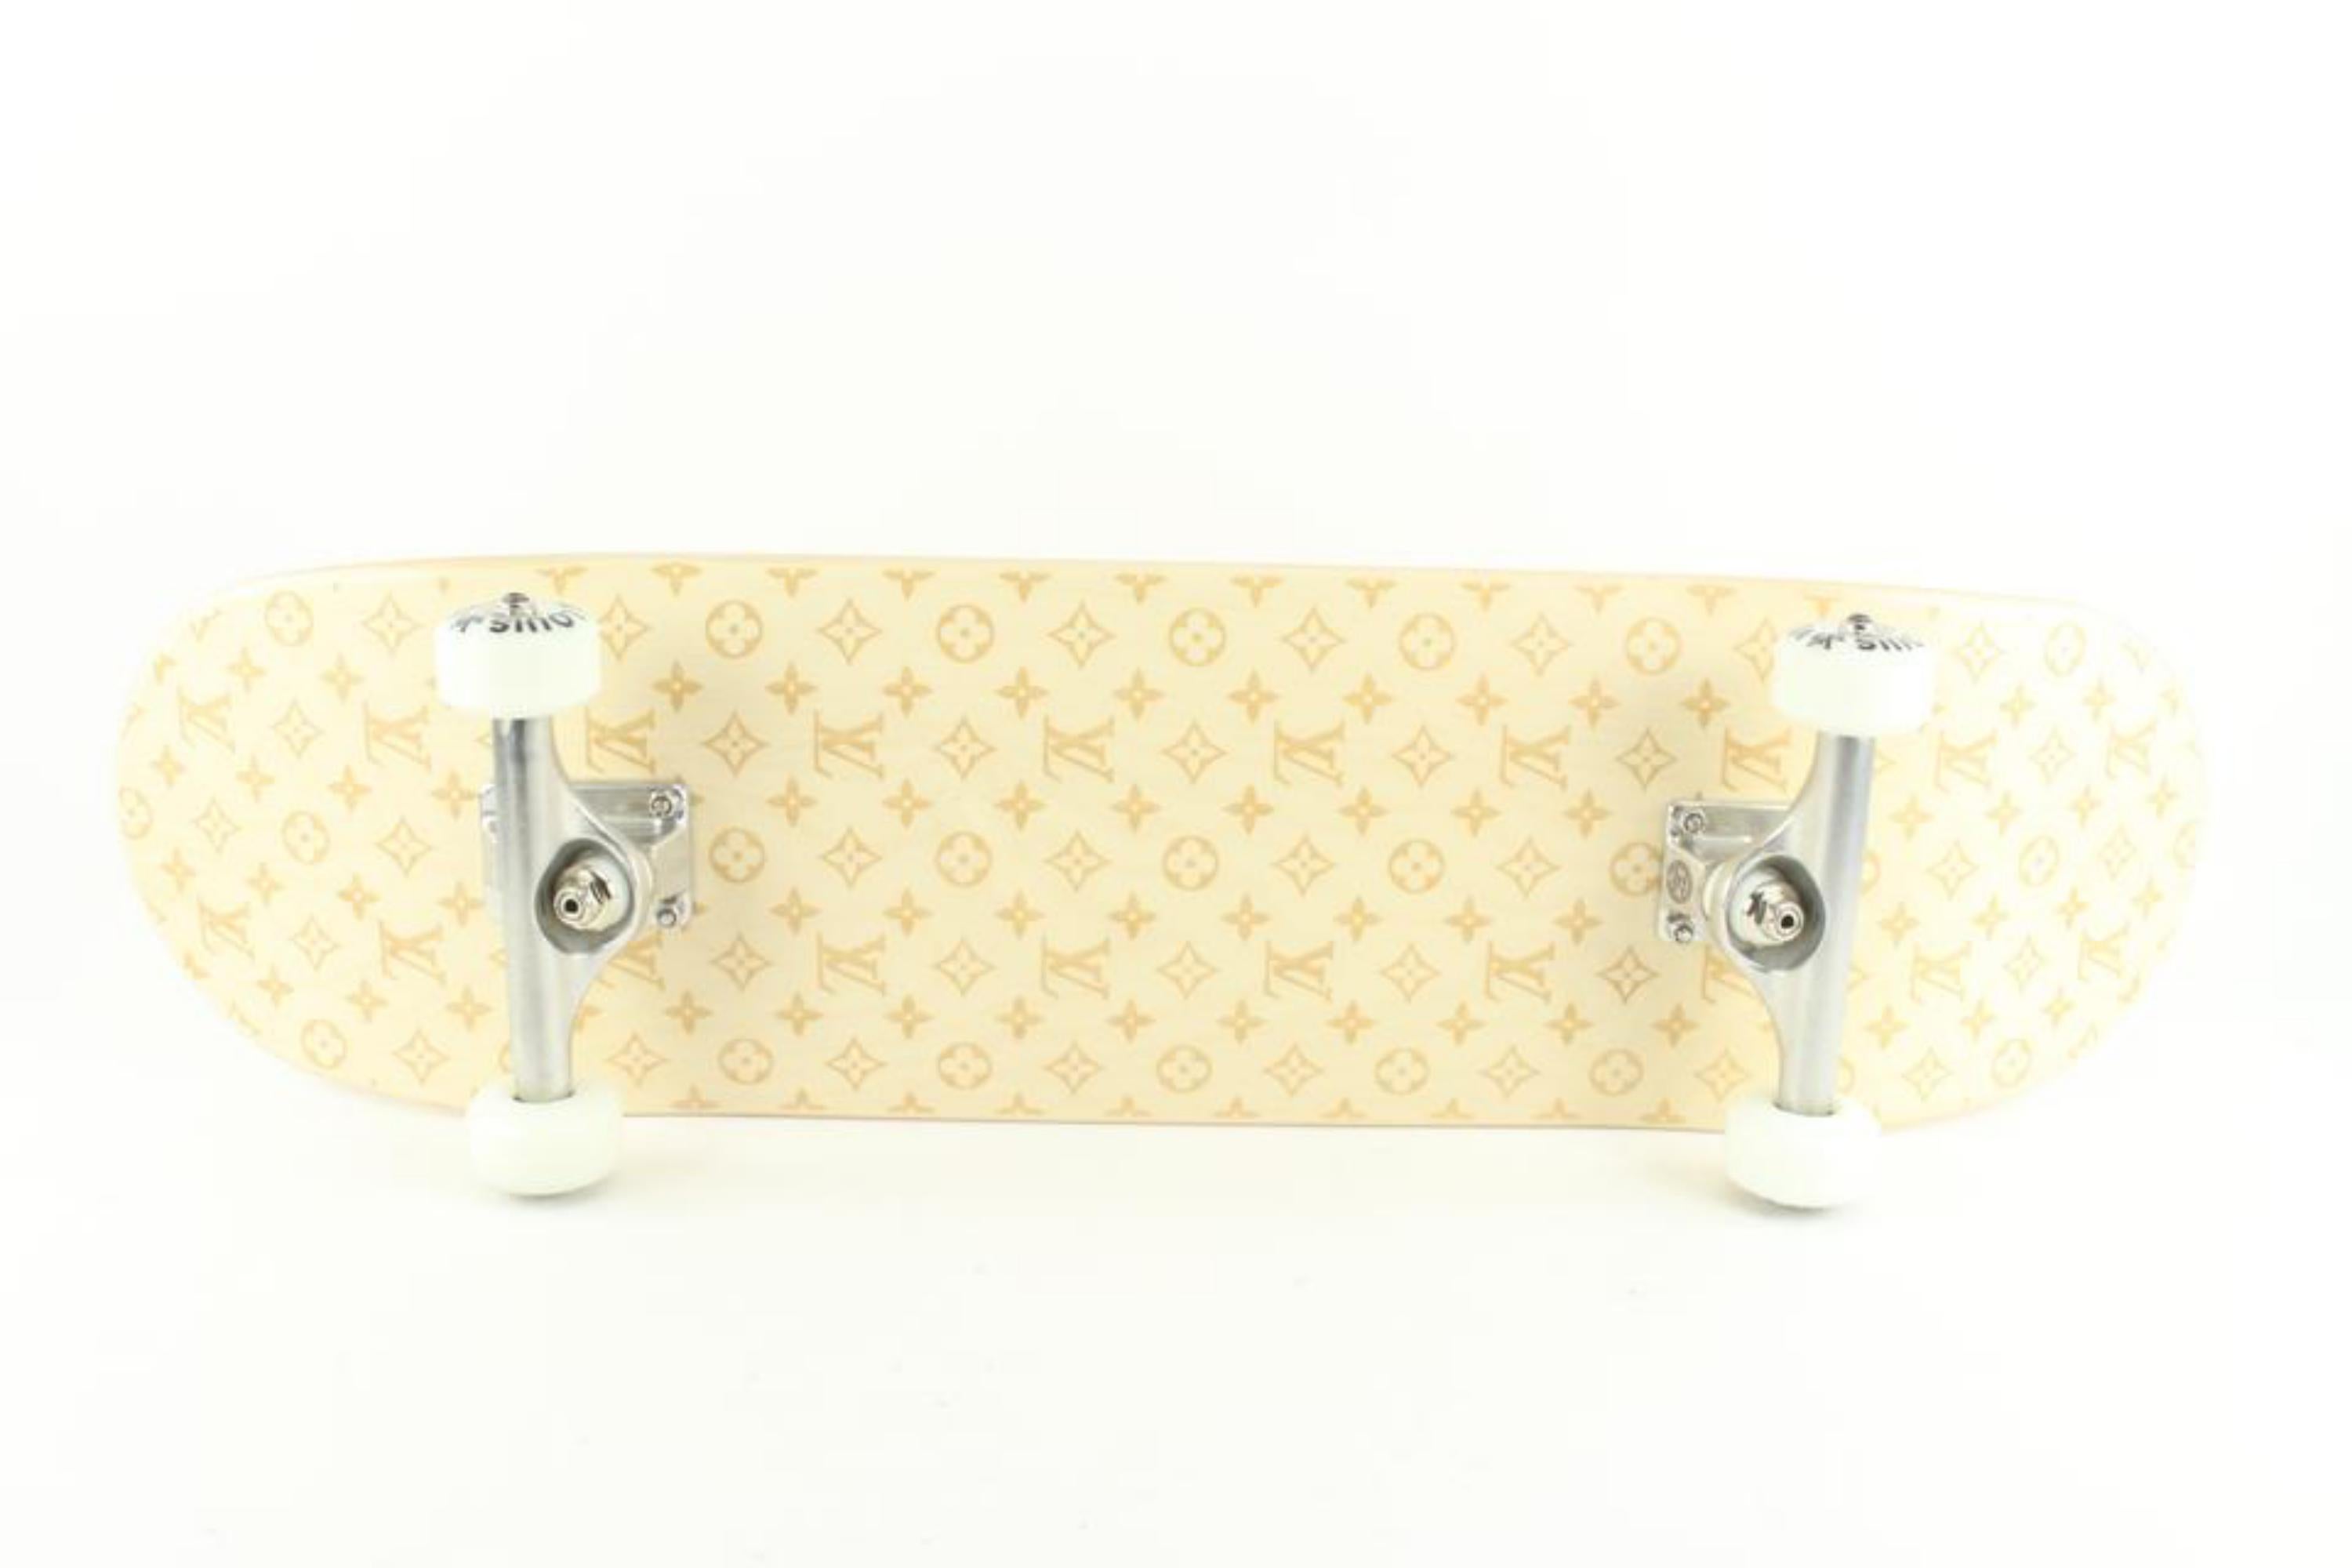 Louis Vuitton SS21 Virgil Abloh LV Monogram Skateboard 1223lv6 In New Condition For Sale In Dix hills, NY